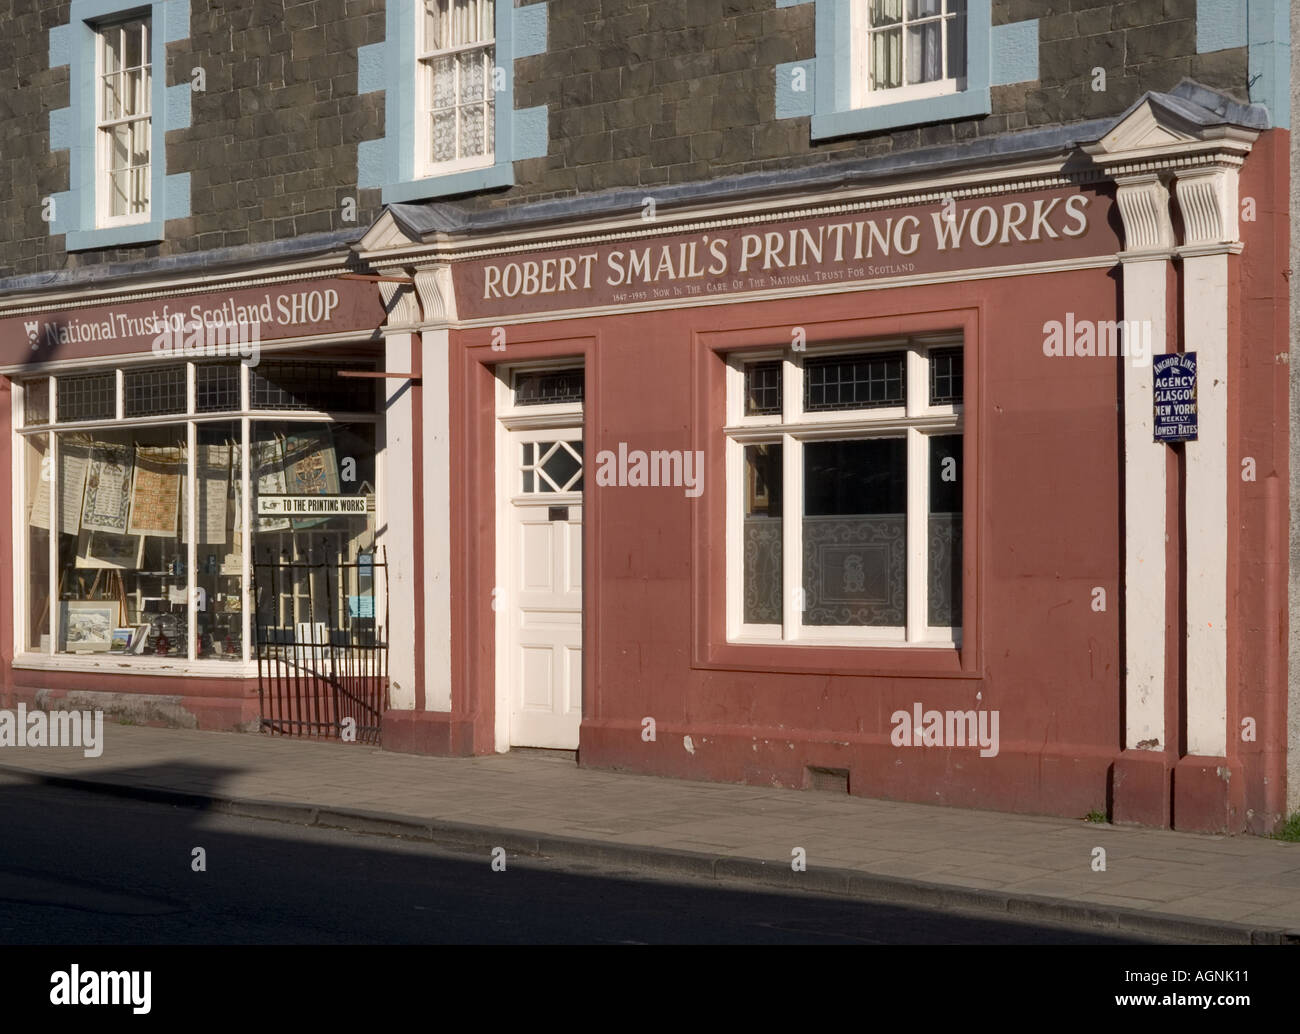 Robert Smails printing works preserved letterpress works in Innerleithen Scottish Borders UK - photographed from public highway Stock Photo